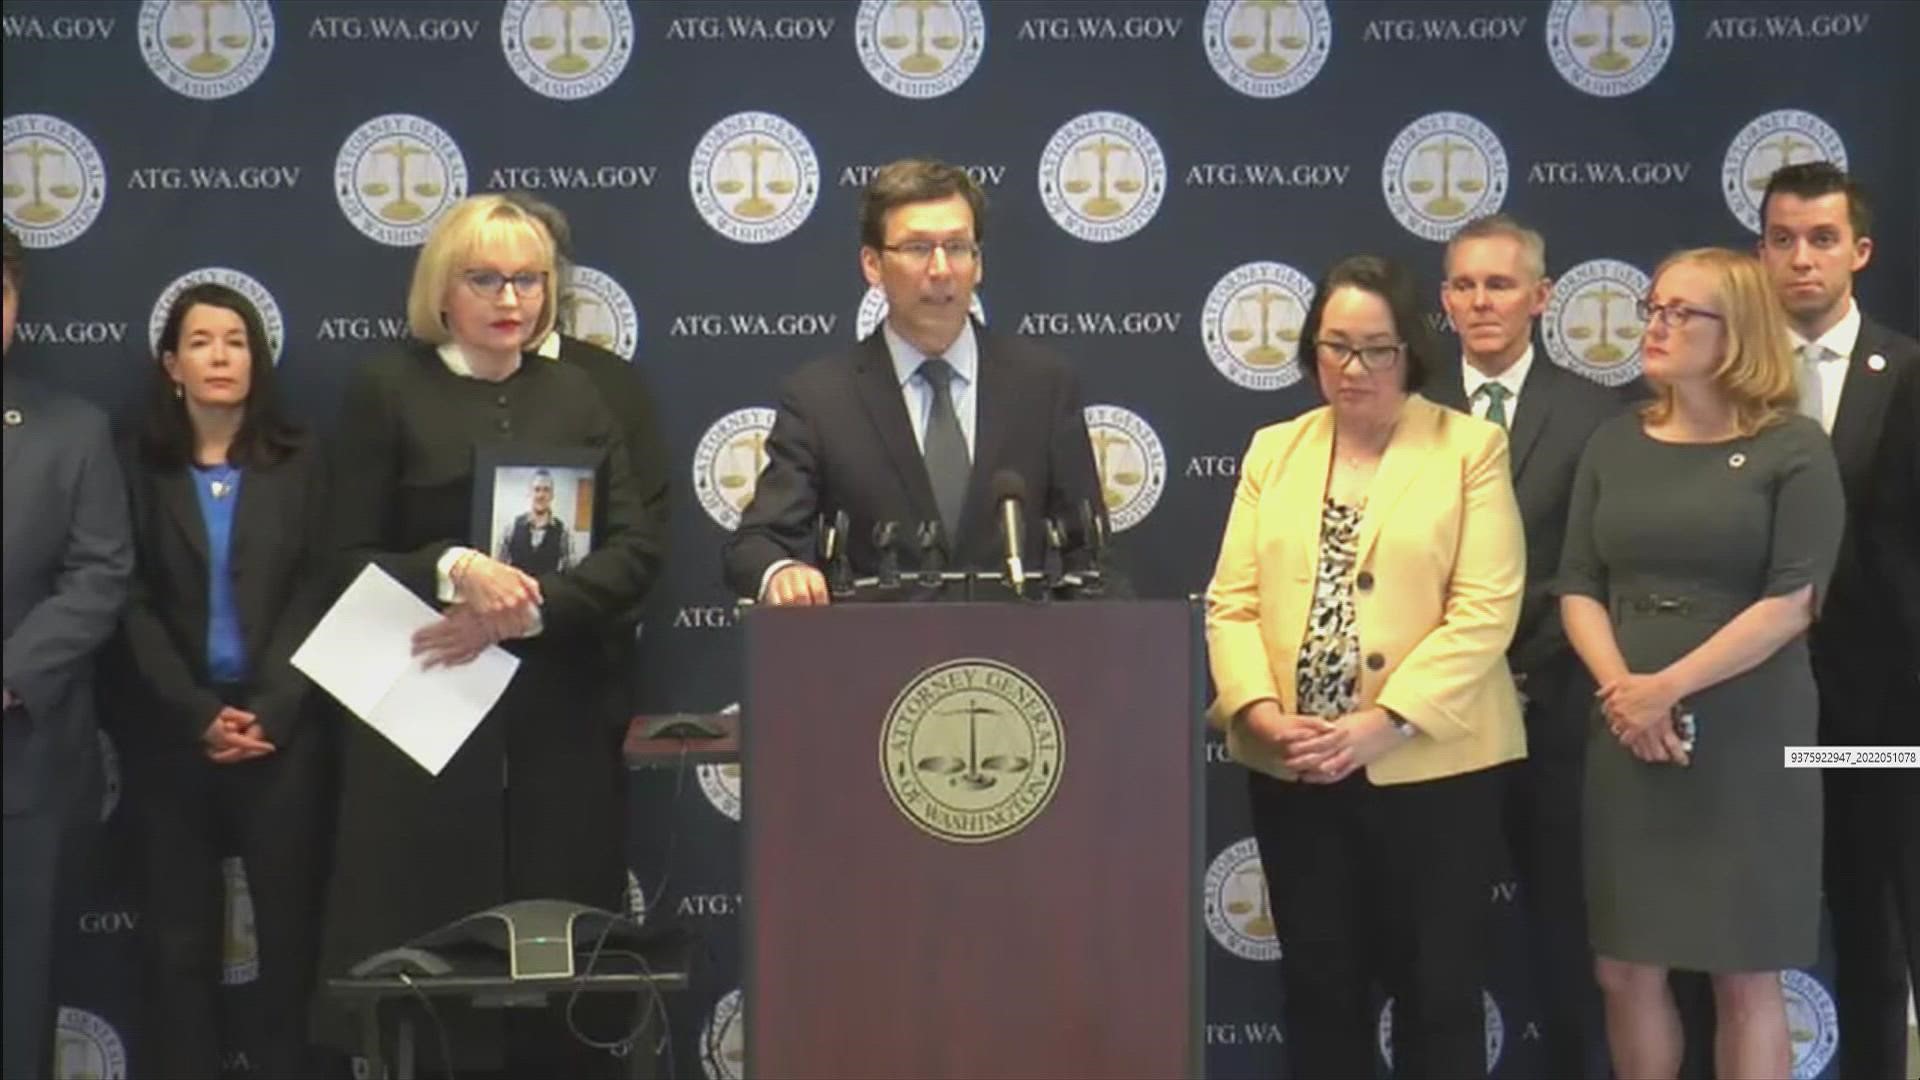 Attorney General Bob Ferguson announced a resolution in a trial against three opioid distributors. The distributors will pay Washington a total of $518 million.